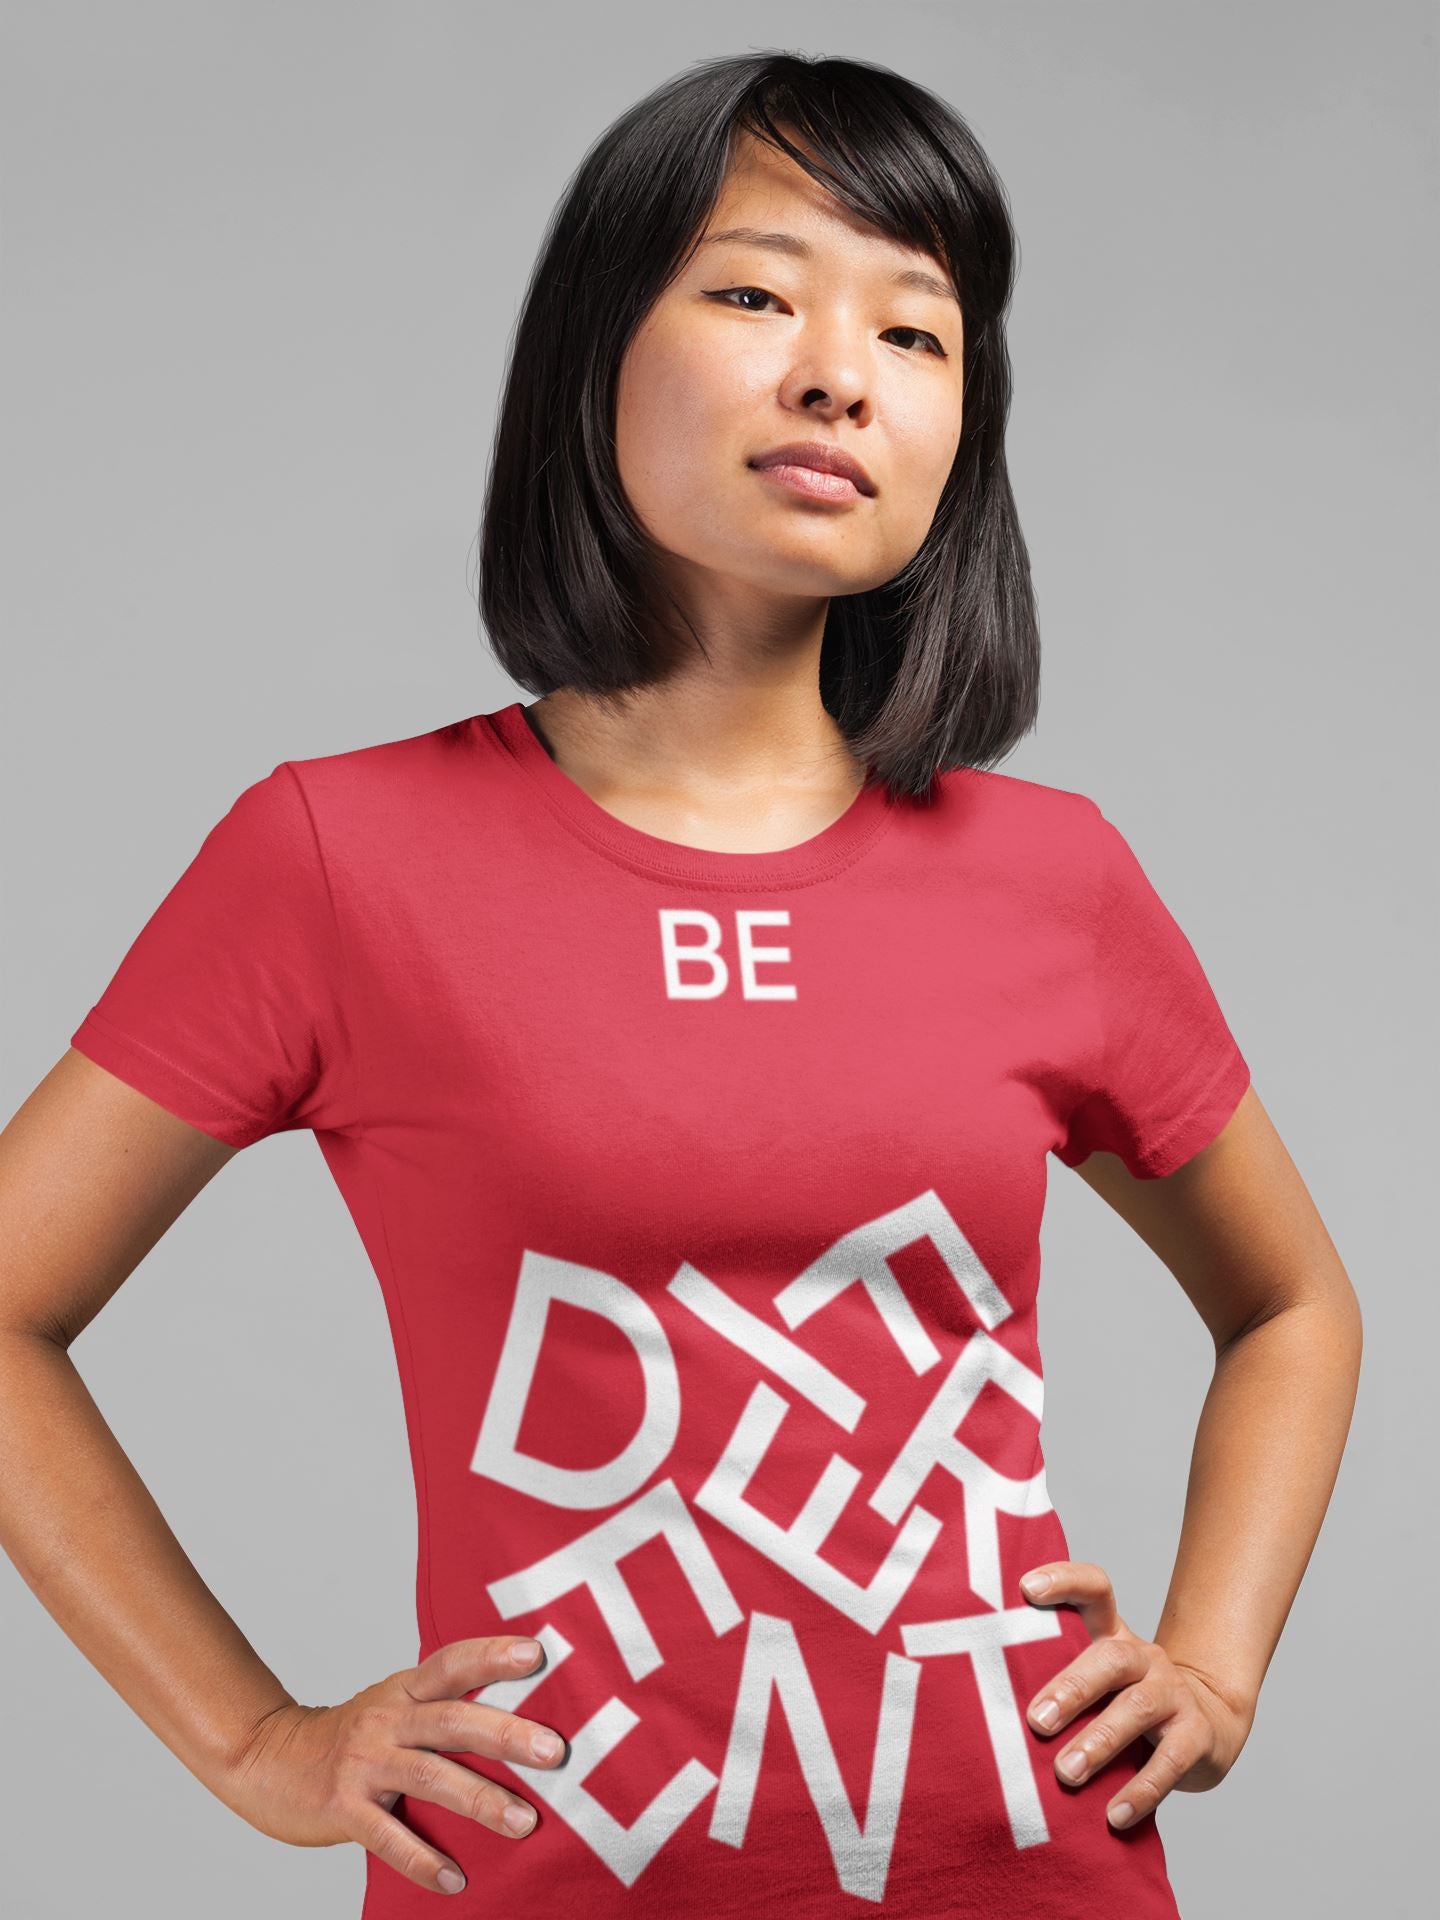 Be Different Red and White Tumbled Letters T-Shirt*